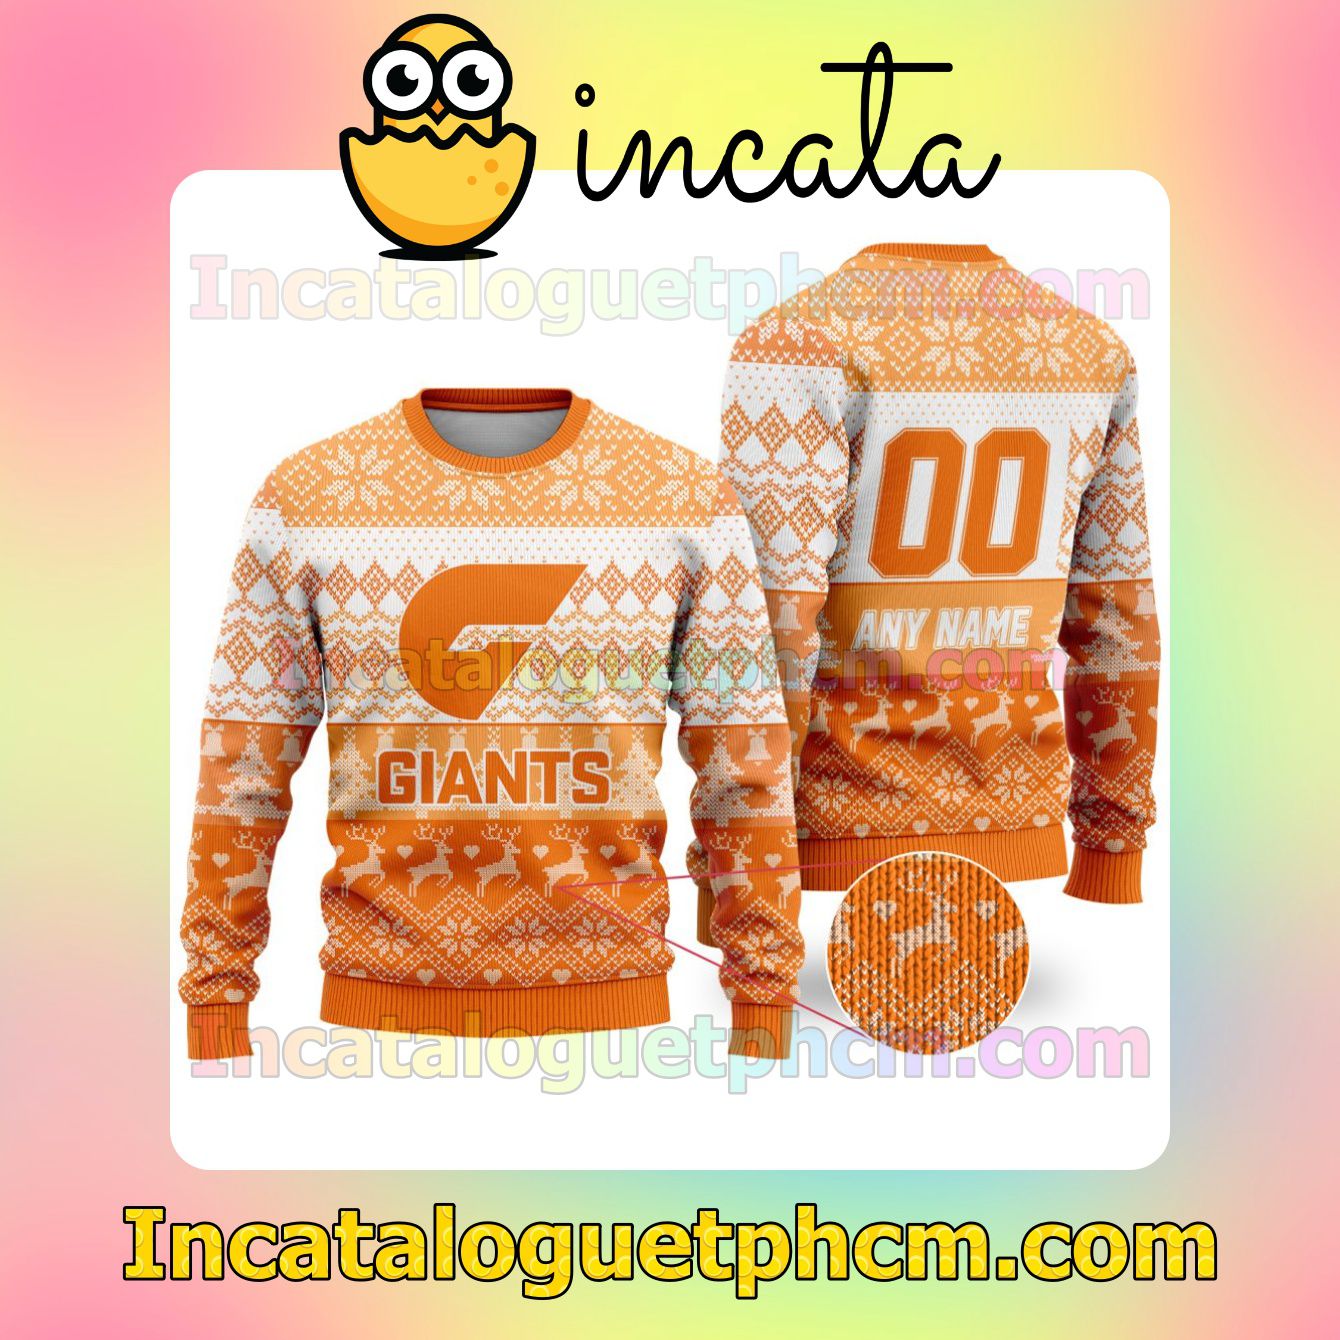 AFL Greater Western Sydney Giants Ugly Christmas Jumper Sweater